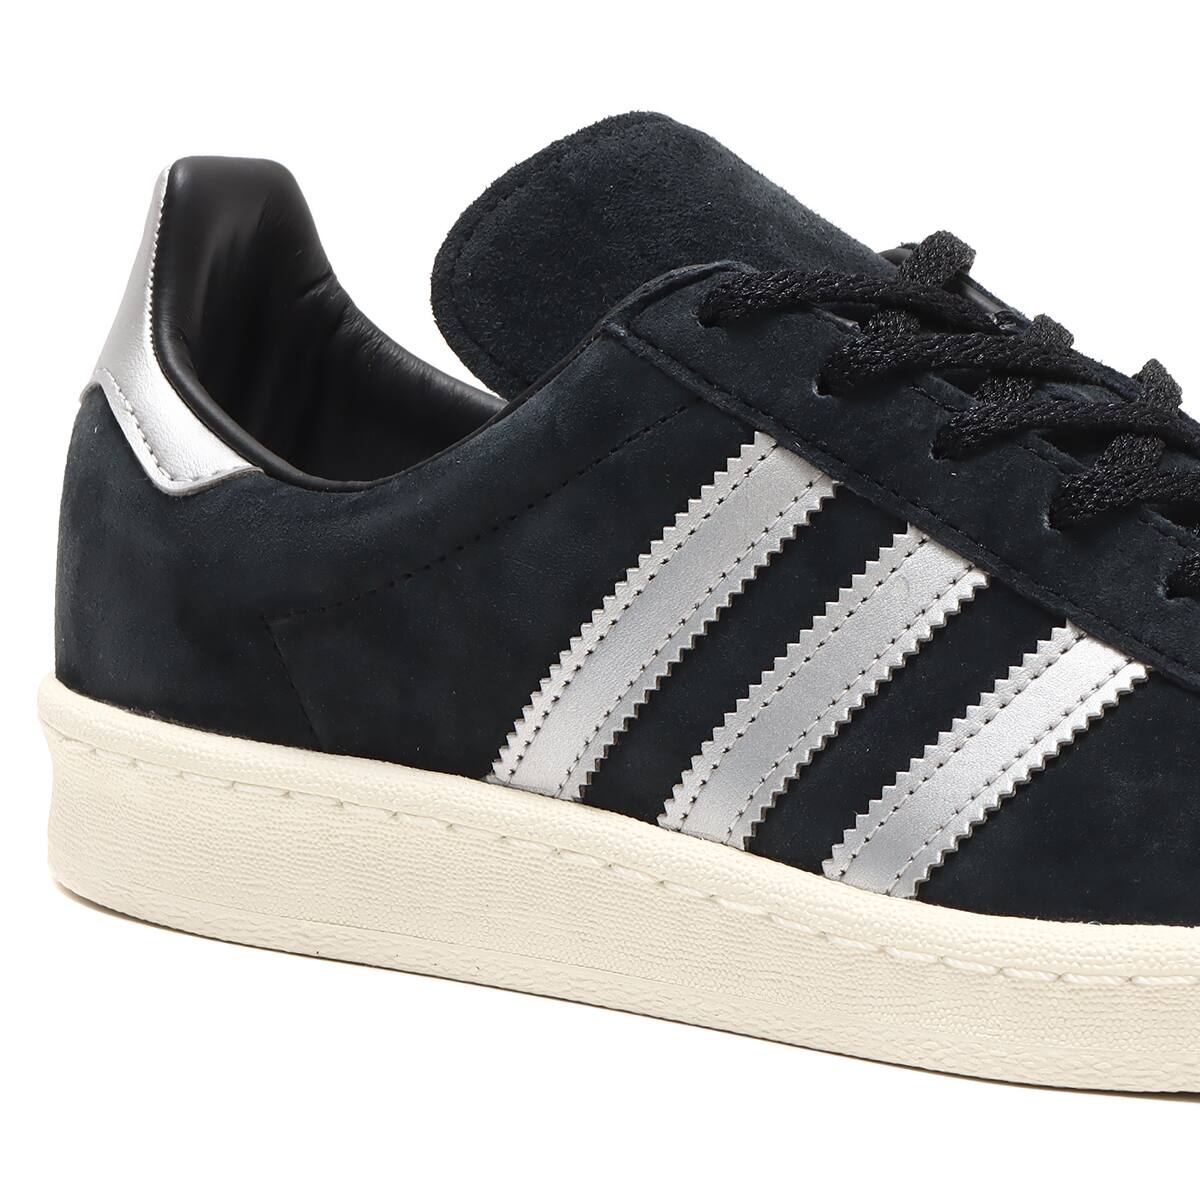 adidas CAMPUS 80s CORE BLACK/FOOTWEAR WHITE/OFF WHITE 23SS-S